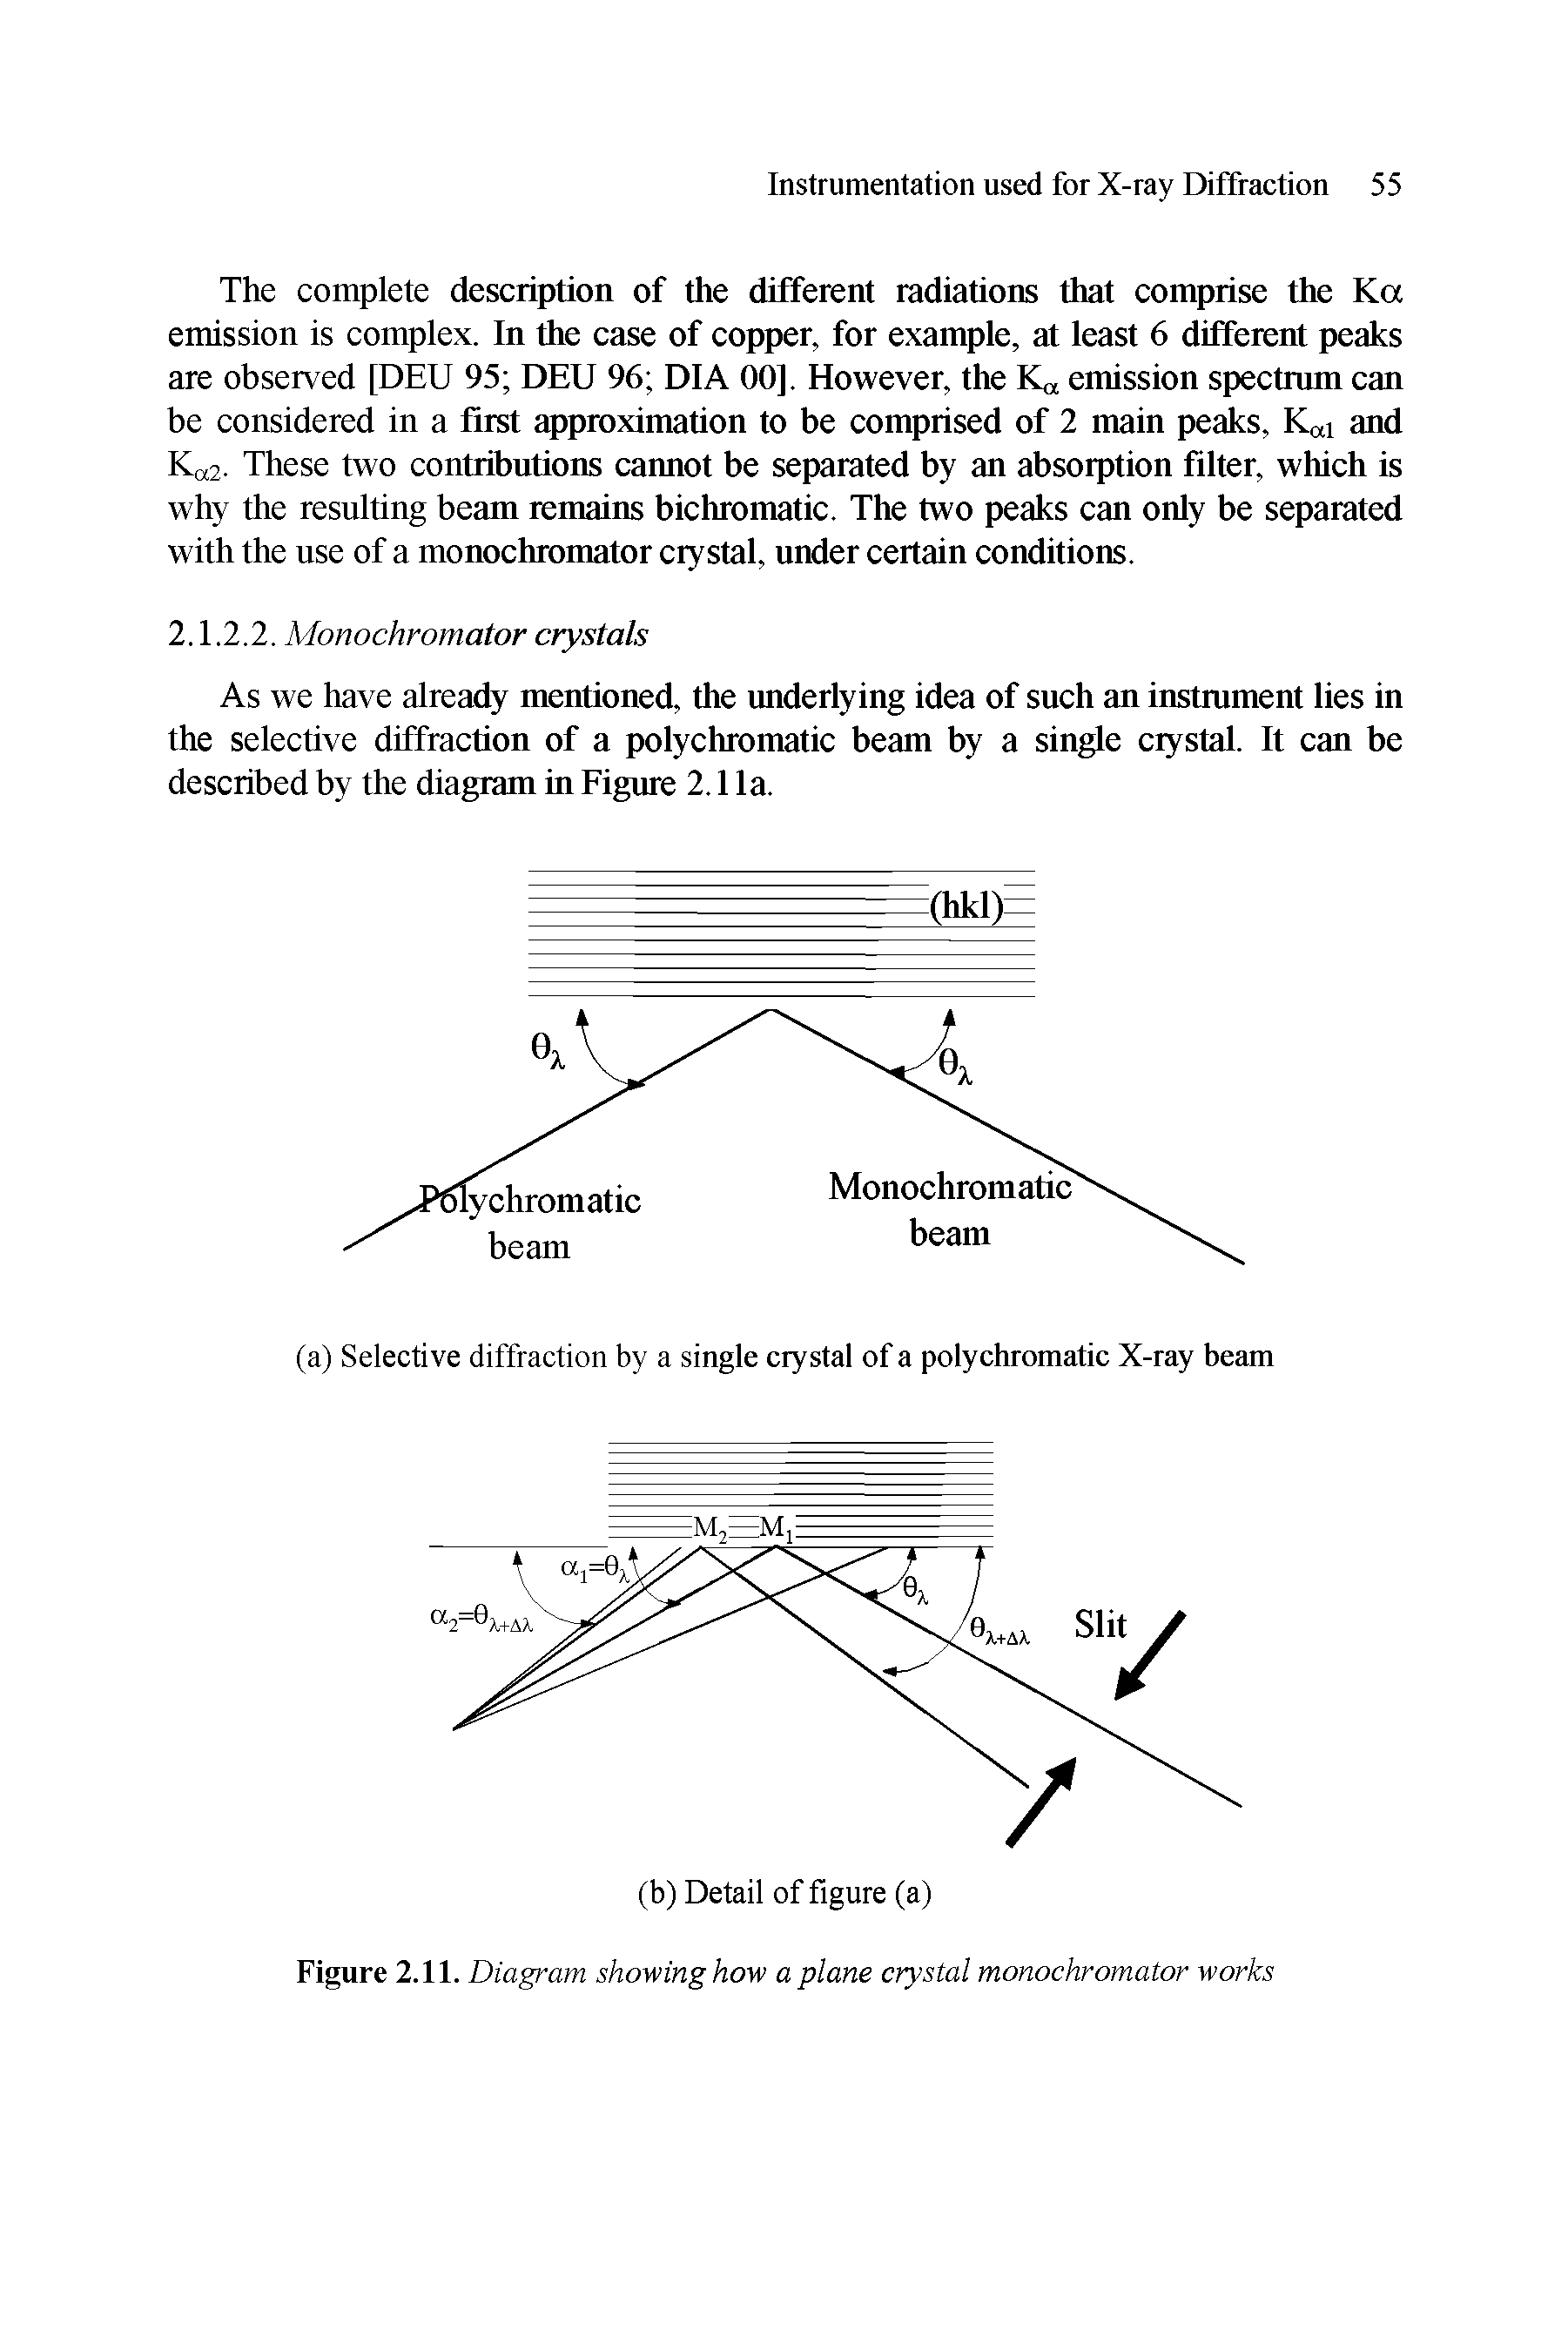 Figure 2.11. Diagram showing how a plane crystal monochromator works...